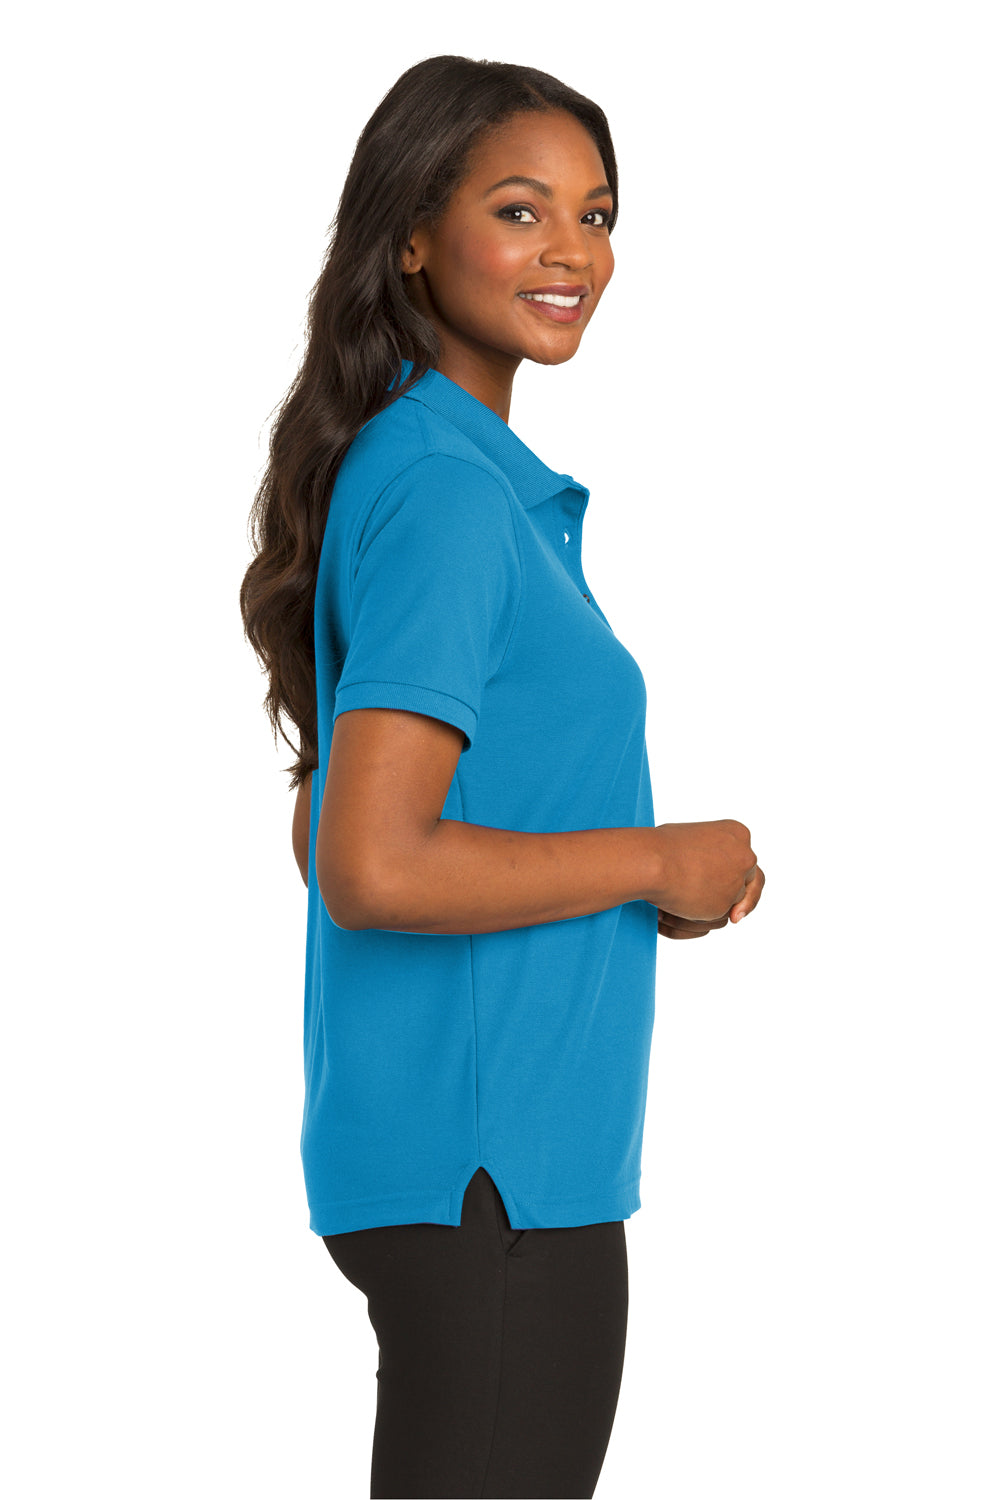 Port Authority L500 Womens Silk Touch Wrinkle Resistant Short Sleeve Polo Shirt Turquoise Blue Side